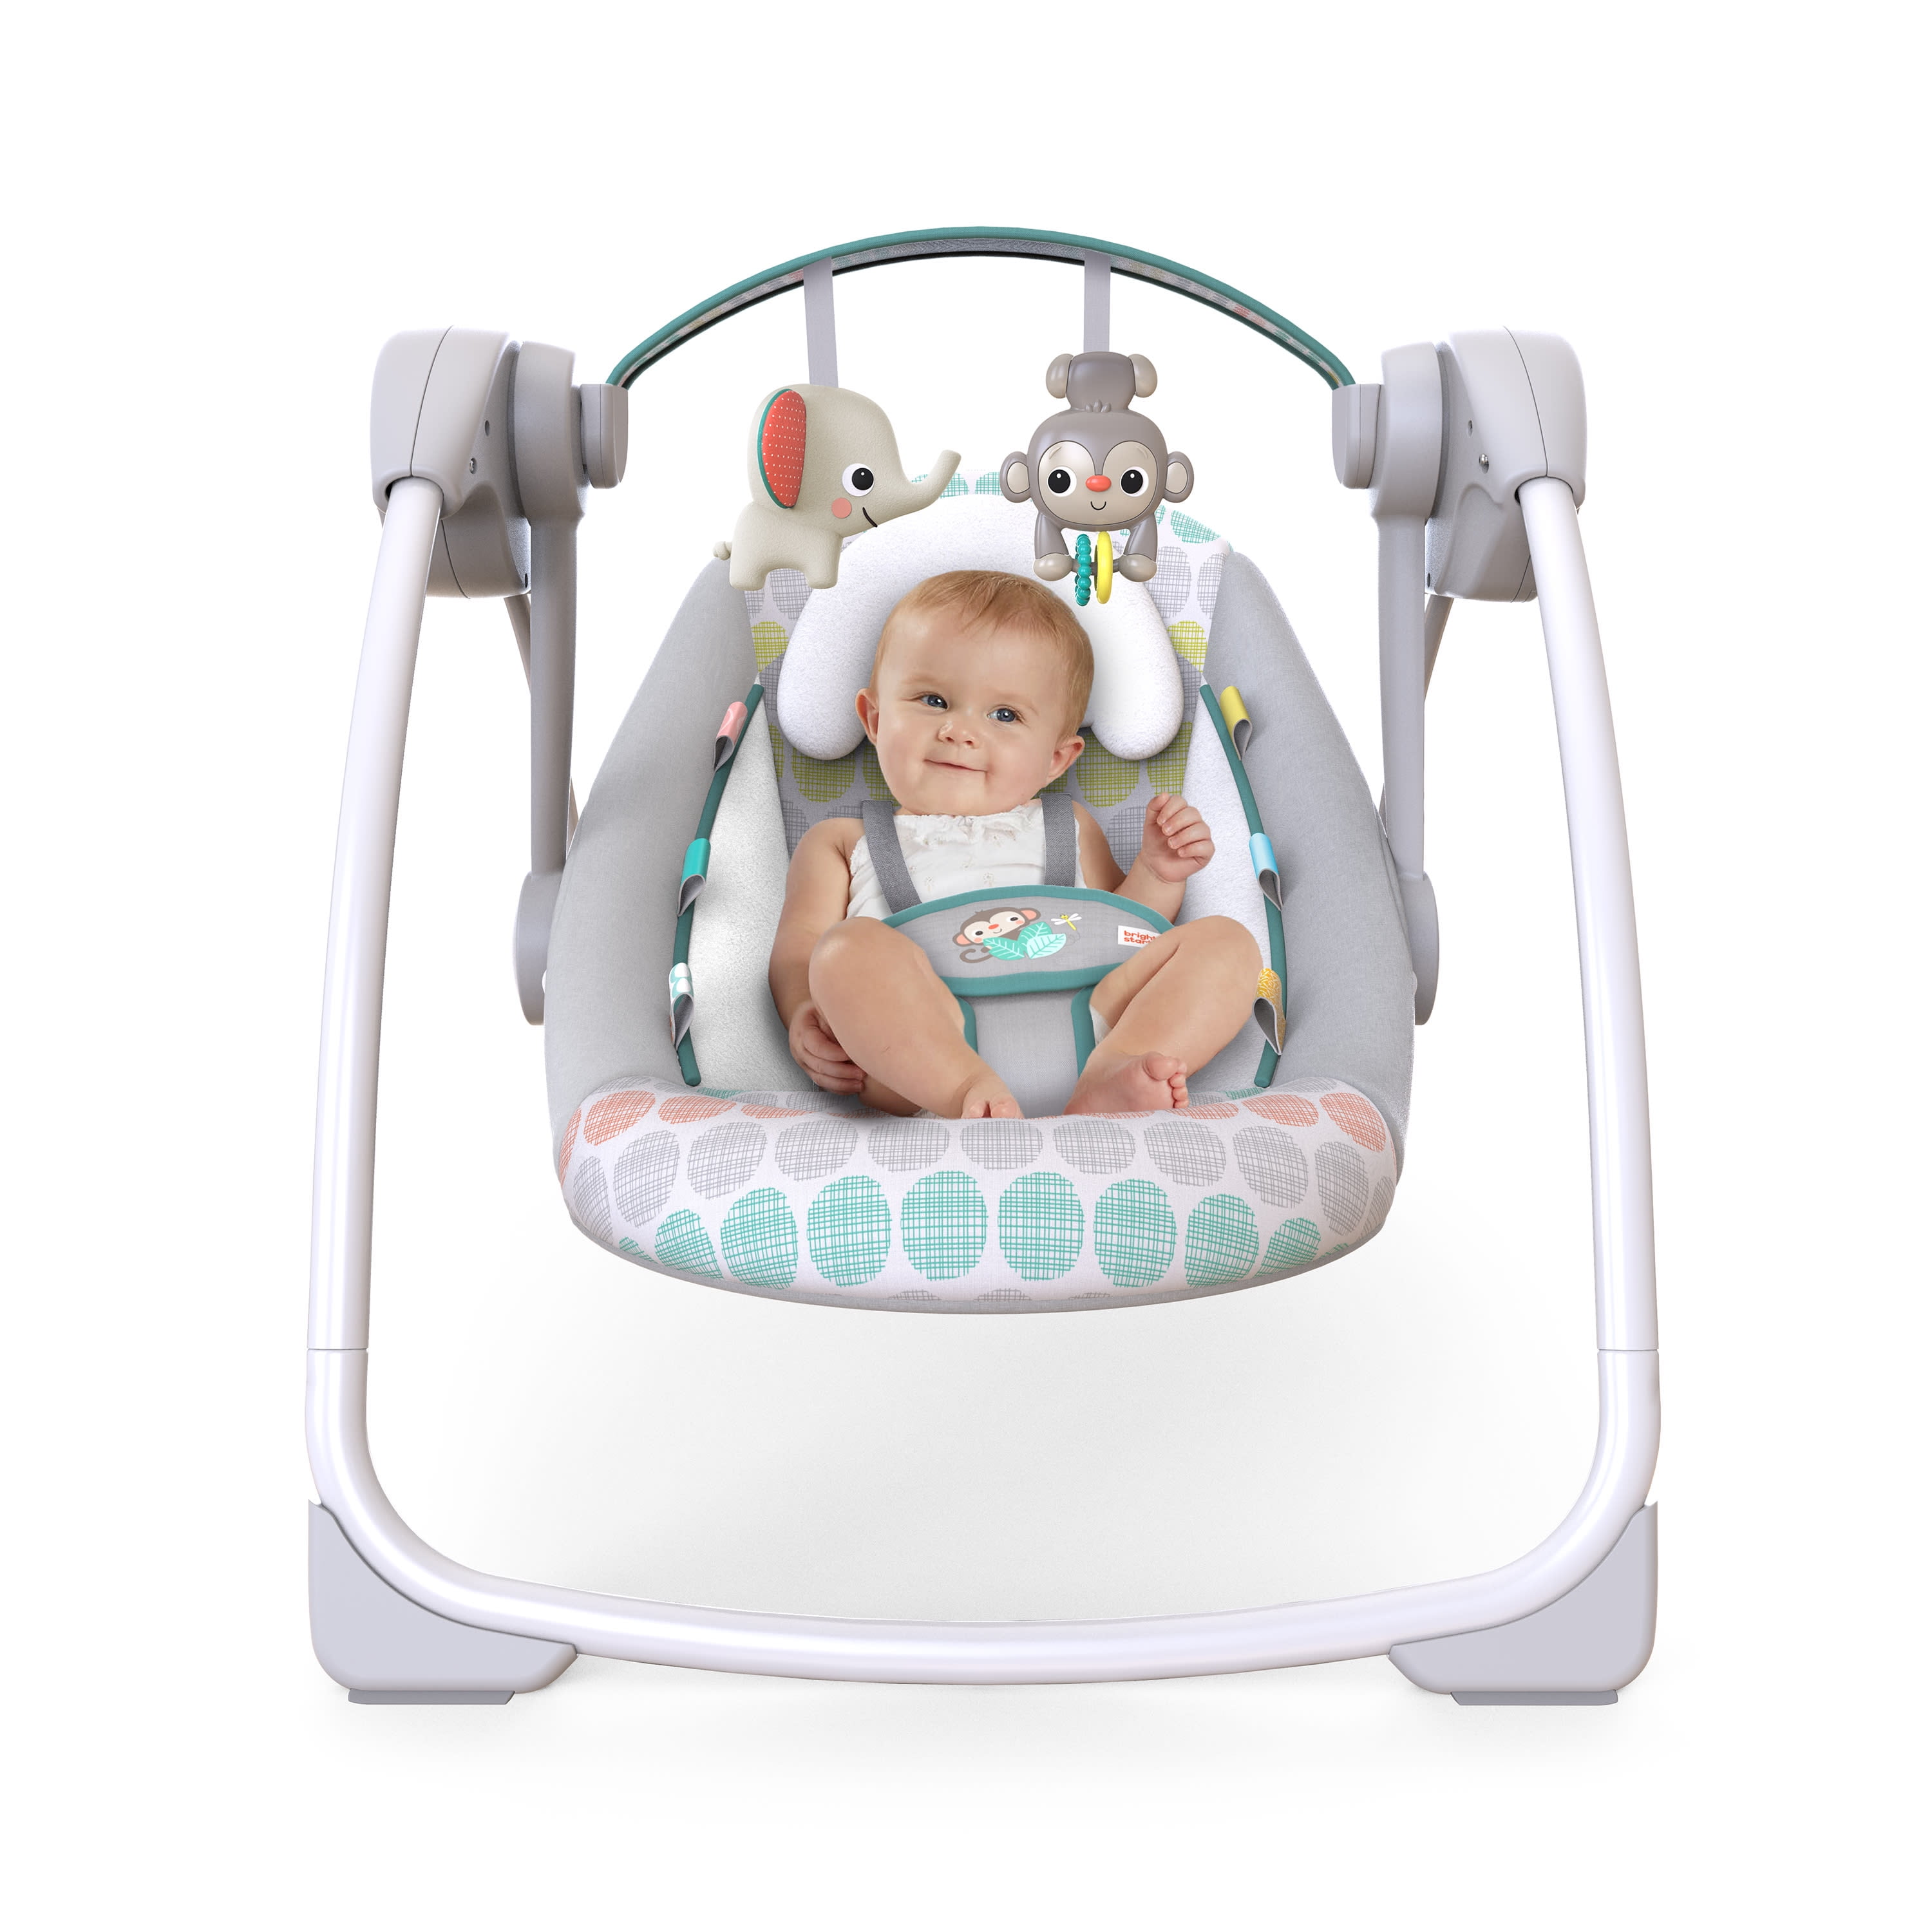 1 inch White Replacement Seat Buckle Compatible with Bright Starts Baby Infant Swings Rockers Bouncers 